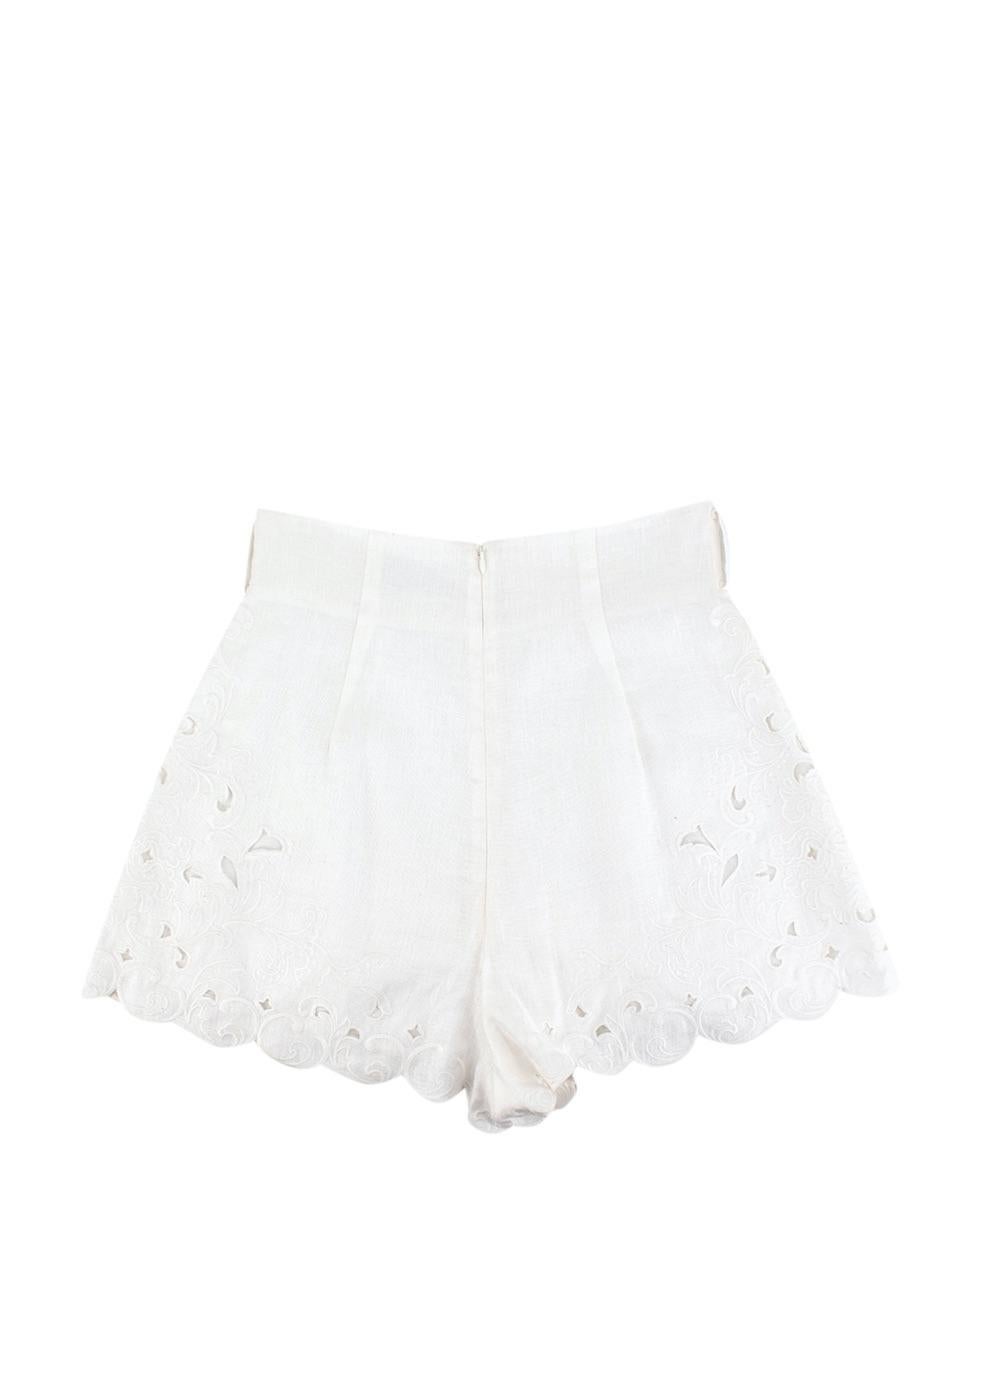 Zimmermann Ivory Embroidered Nina Shorts & Blouse - US 6 For Sale 3